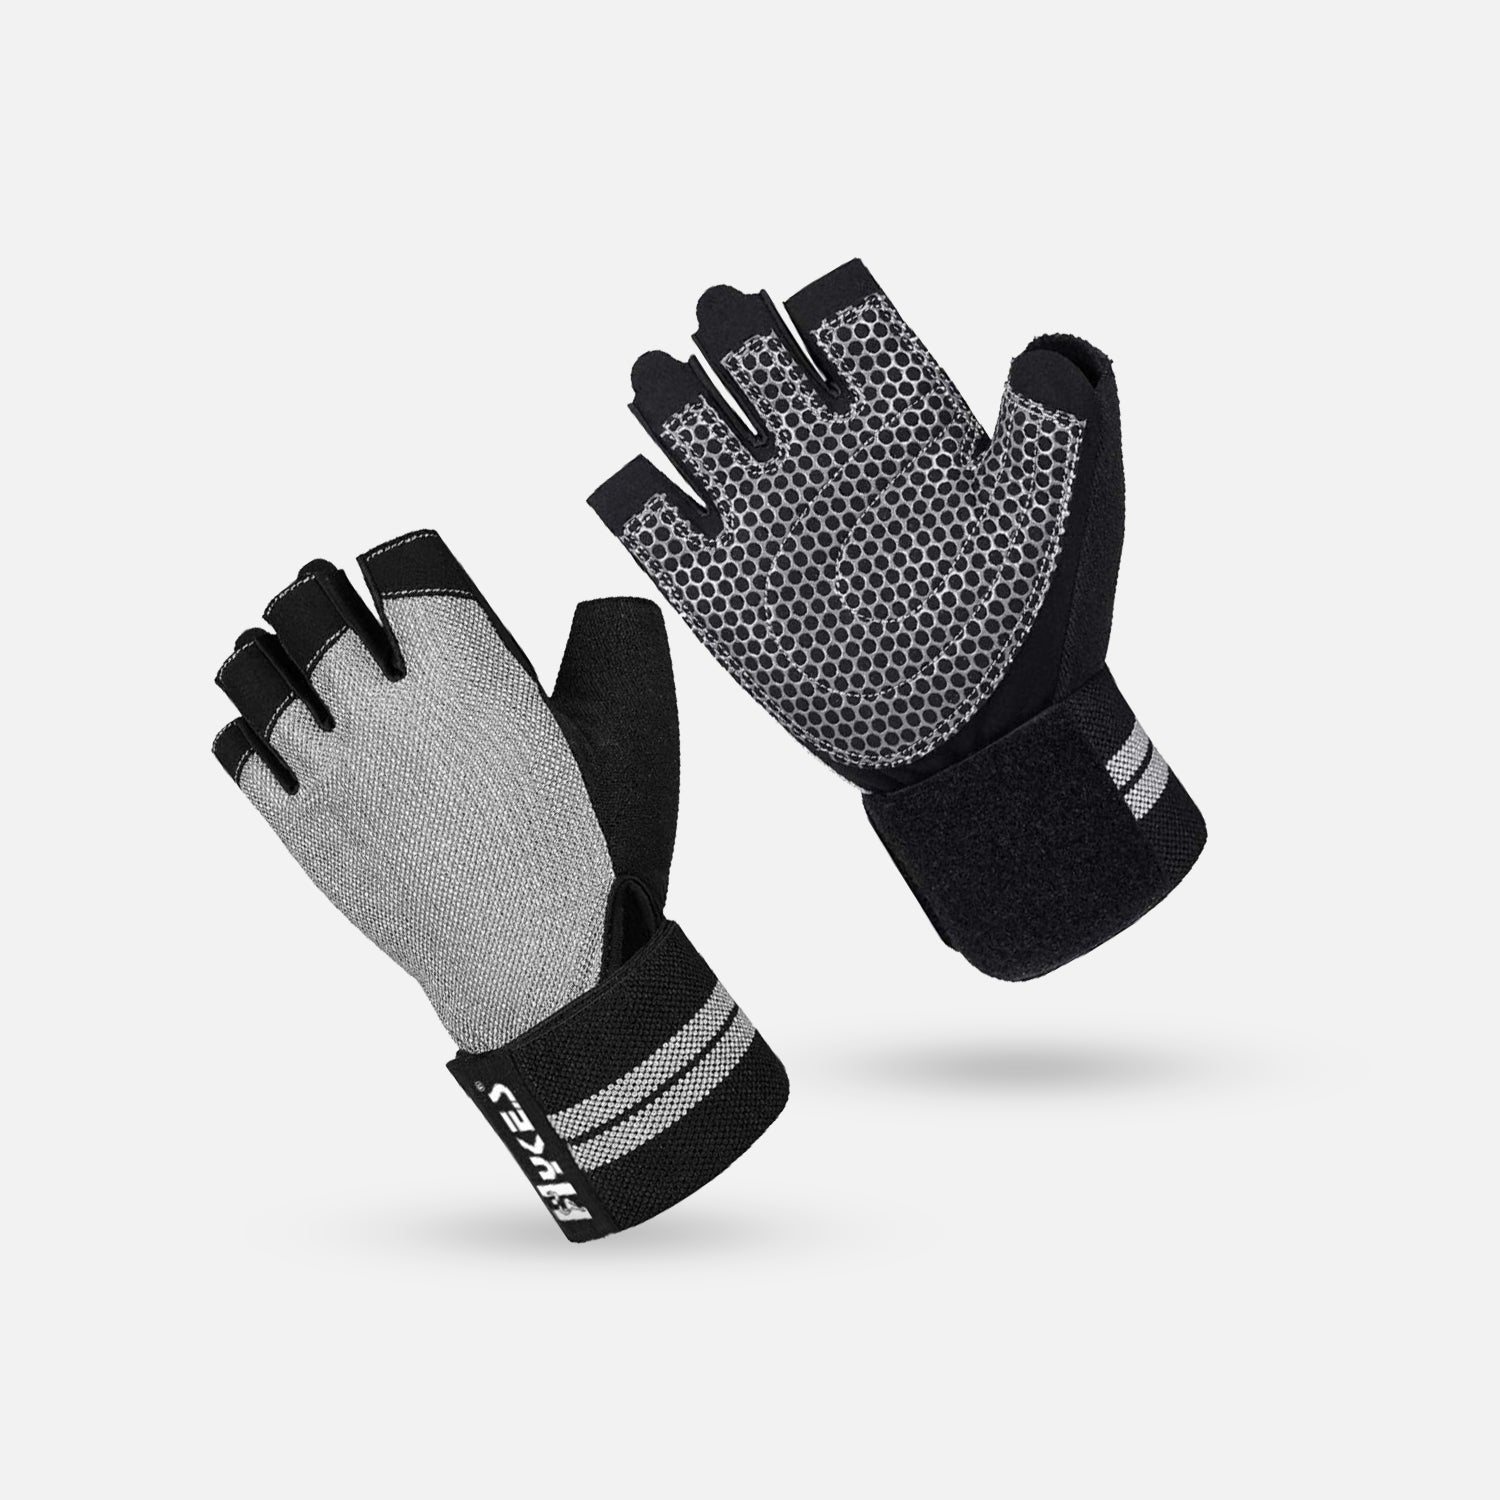 Get Gym Workout Gloves And Best Lifting Gloves With Wrist Support Hykes